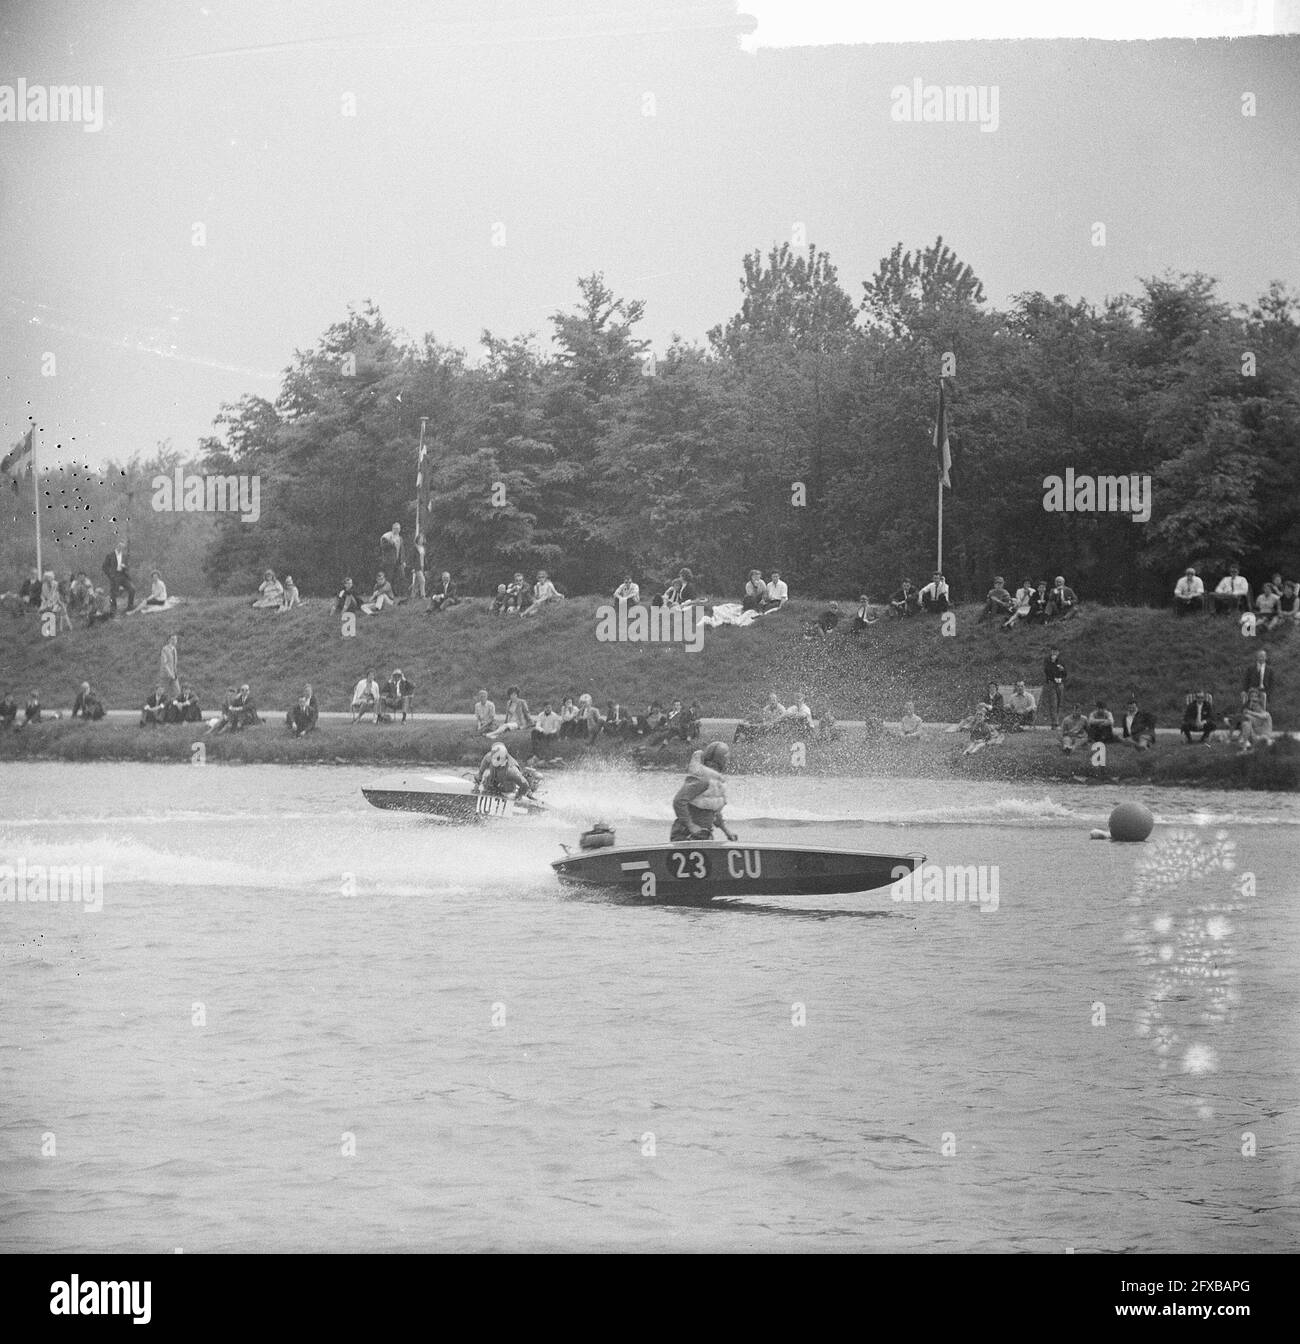 International speedboat races on the Bosbaan, the speedboats in battle, May 23, 1965, SPEEDBOOTRACES, The Netherlands, 20th century press agency photo, news to remember, documentary, historic photography 1945-1990, visual stories, human history of the Twentieth Century, capturing moments in time Stock Photo